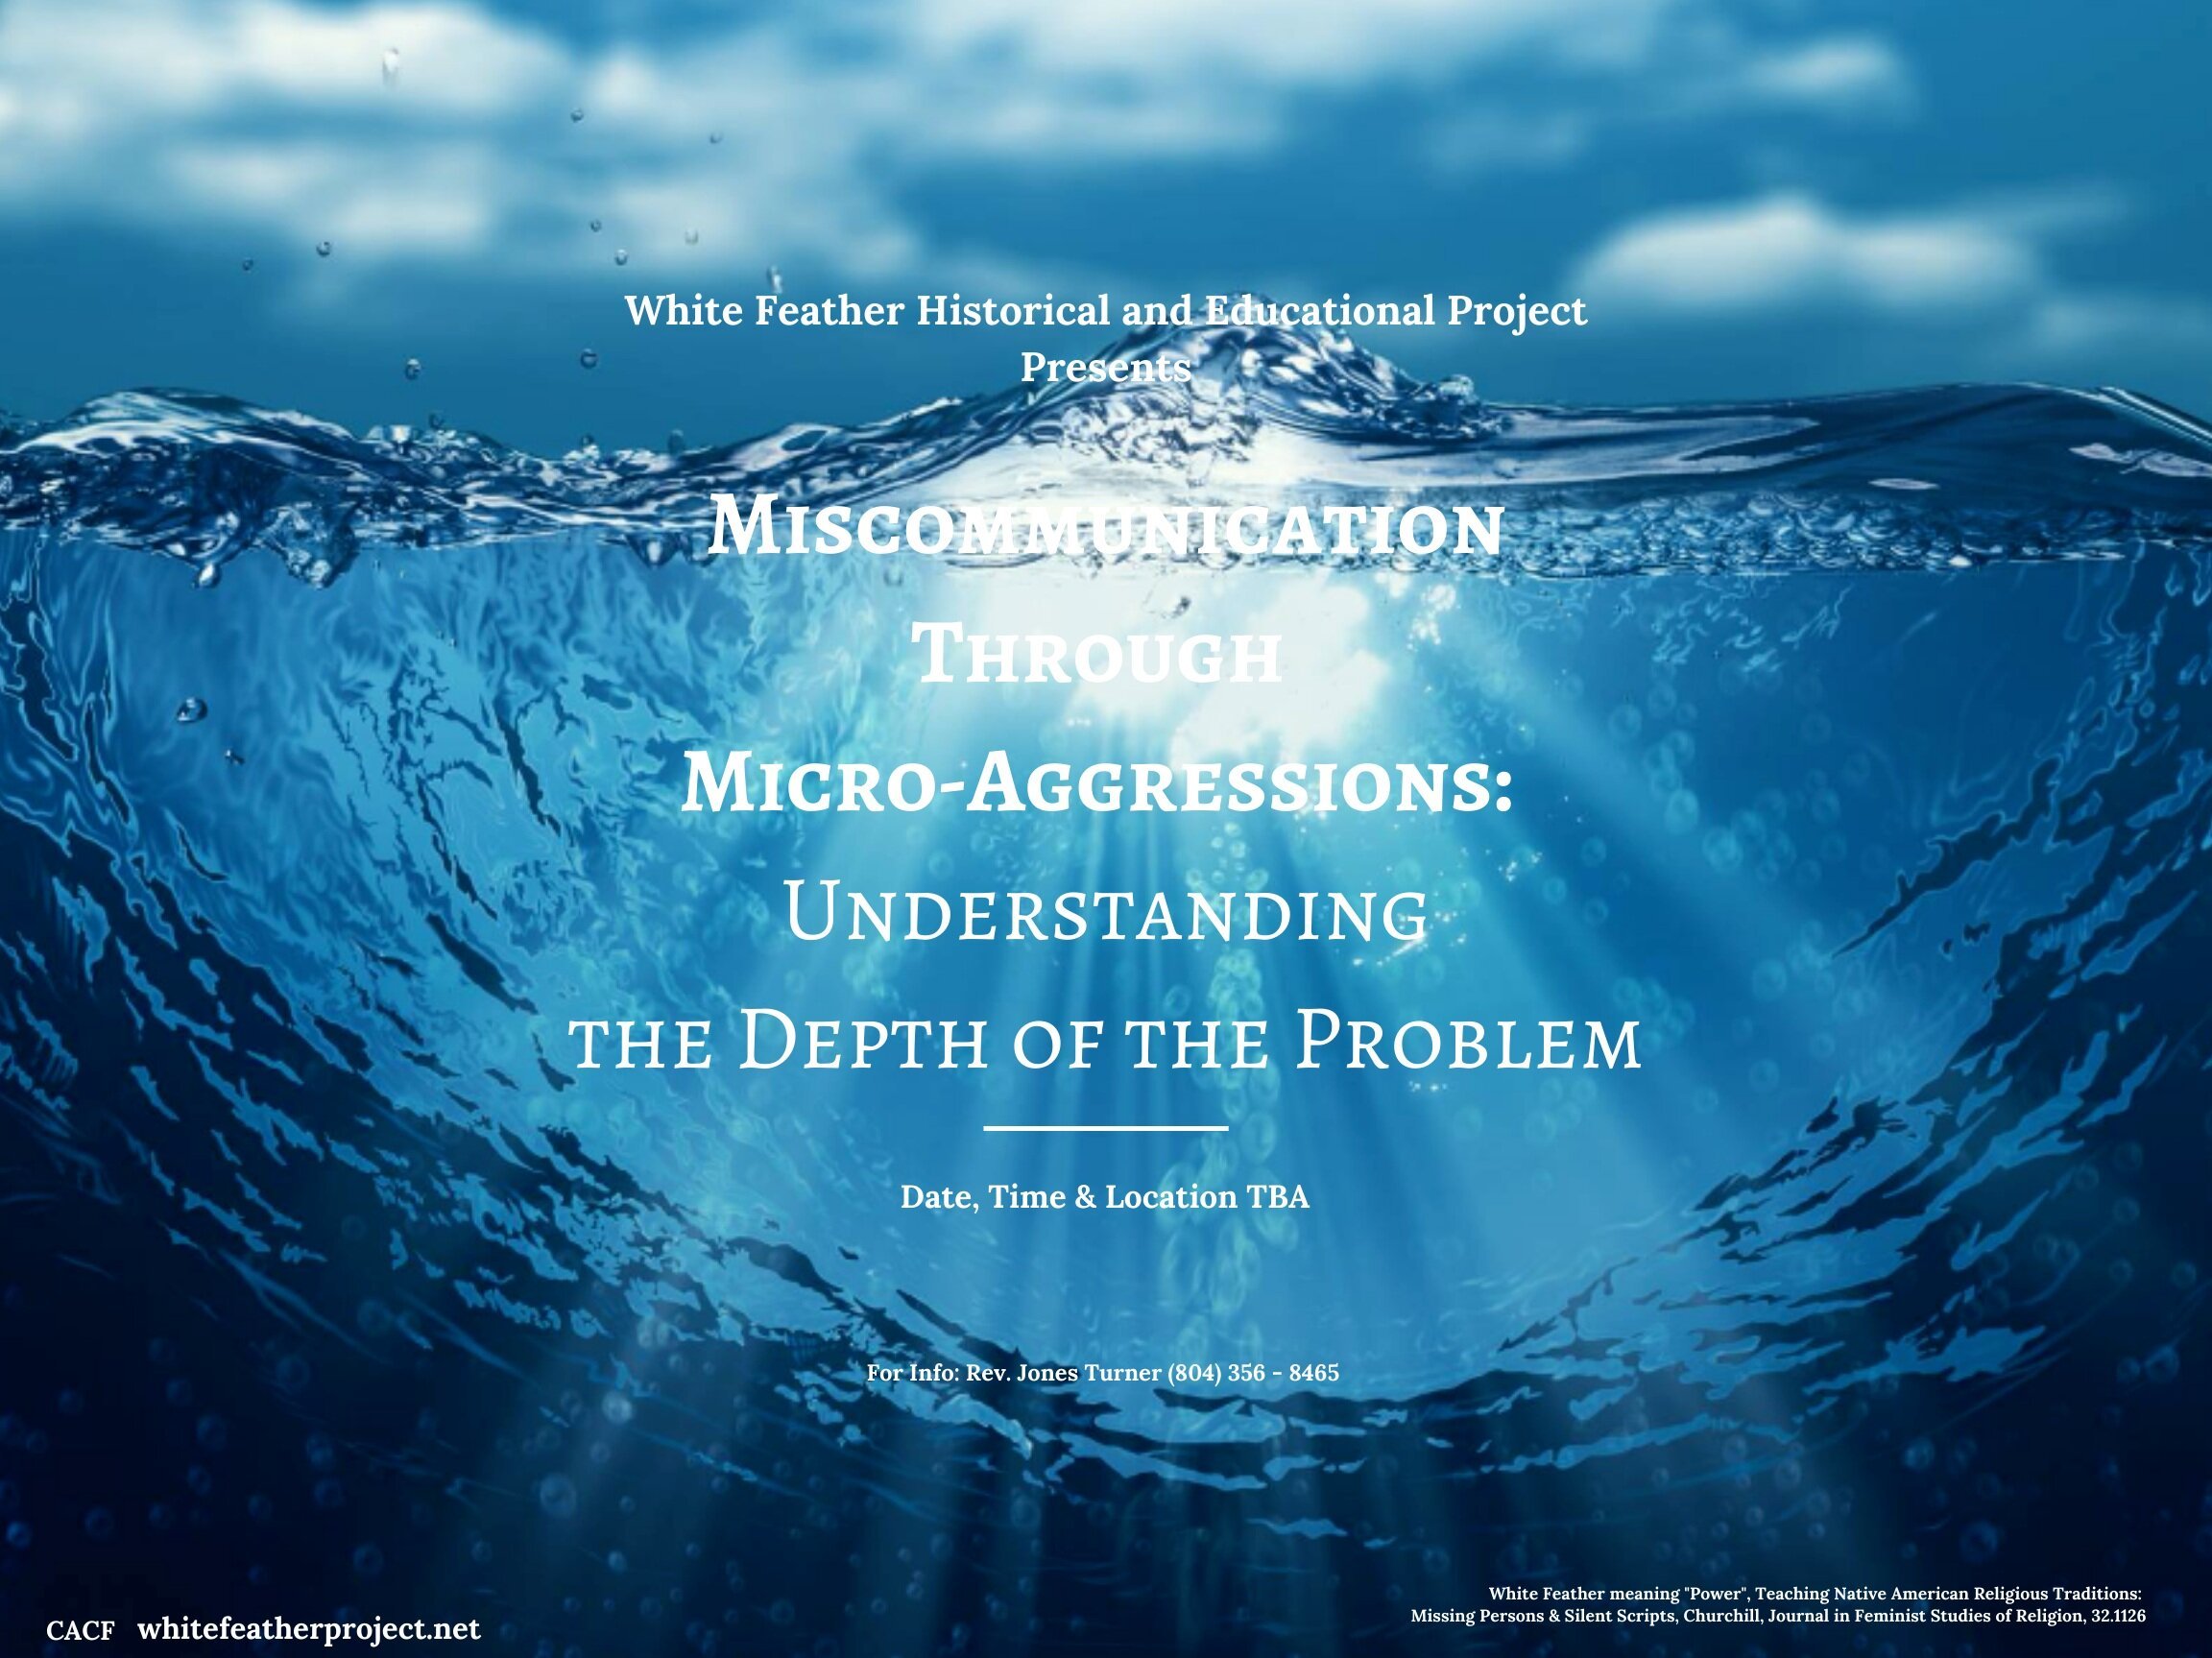 Miscommunication+Through+Micro-Aggressions_++Understanding+the+Depth+of+the+Problem.jpeg